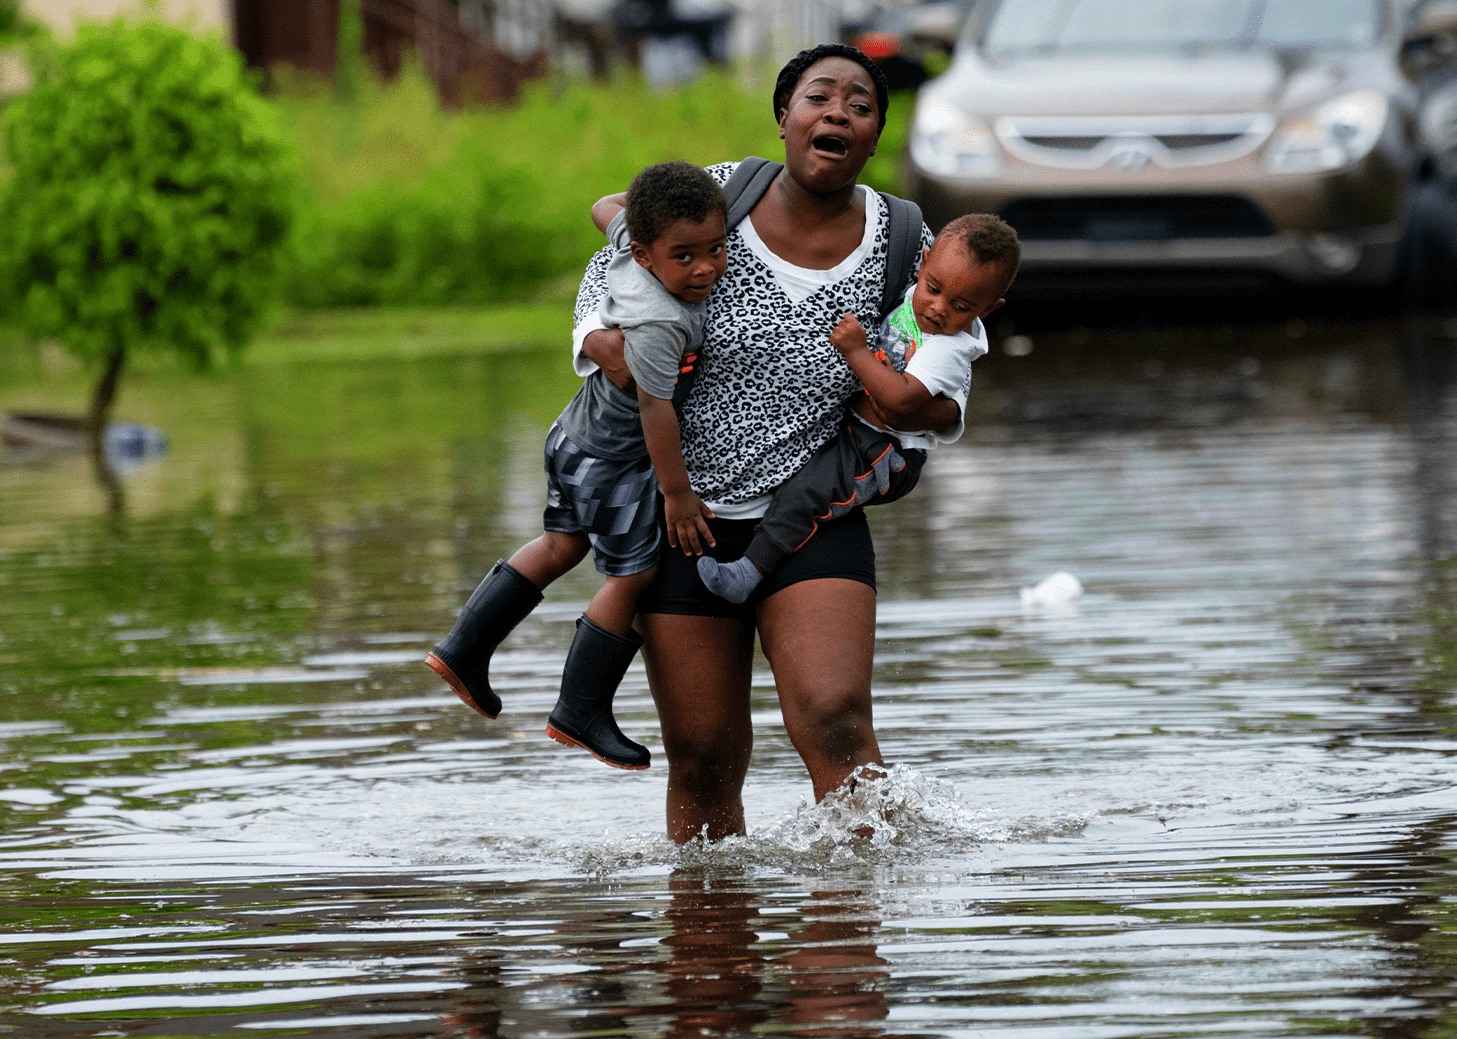 Louisiana Is Currently Experiencing Severe Flooding And Rainfall, Here's The Latest